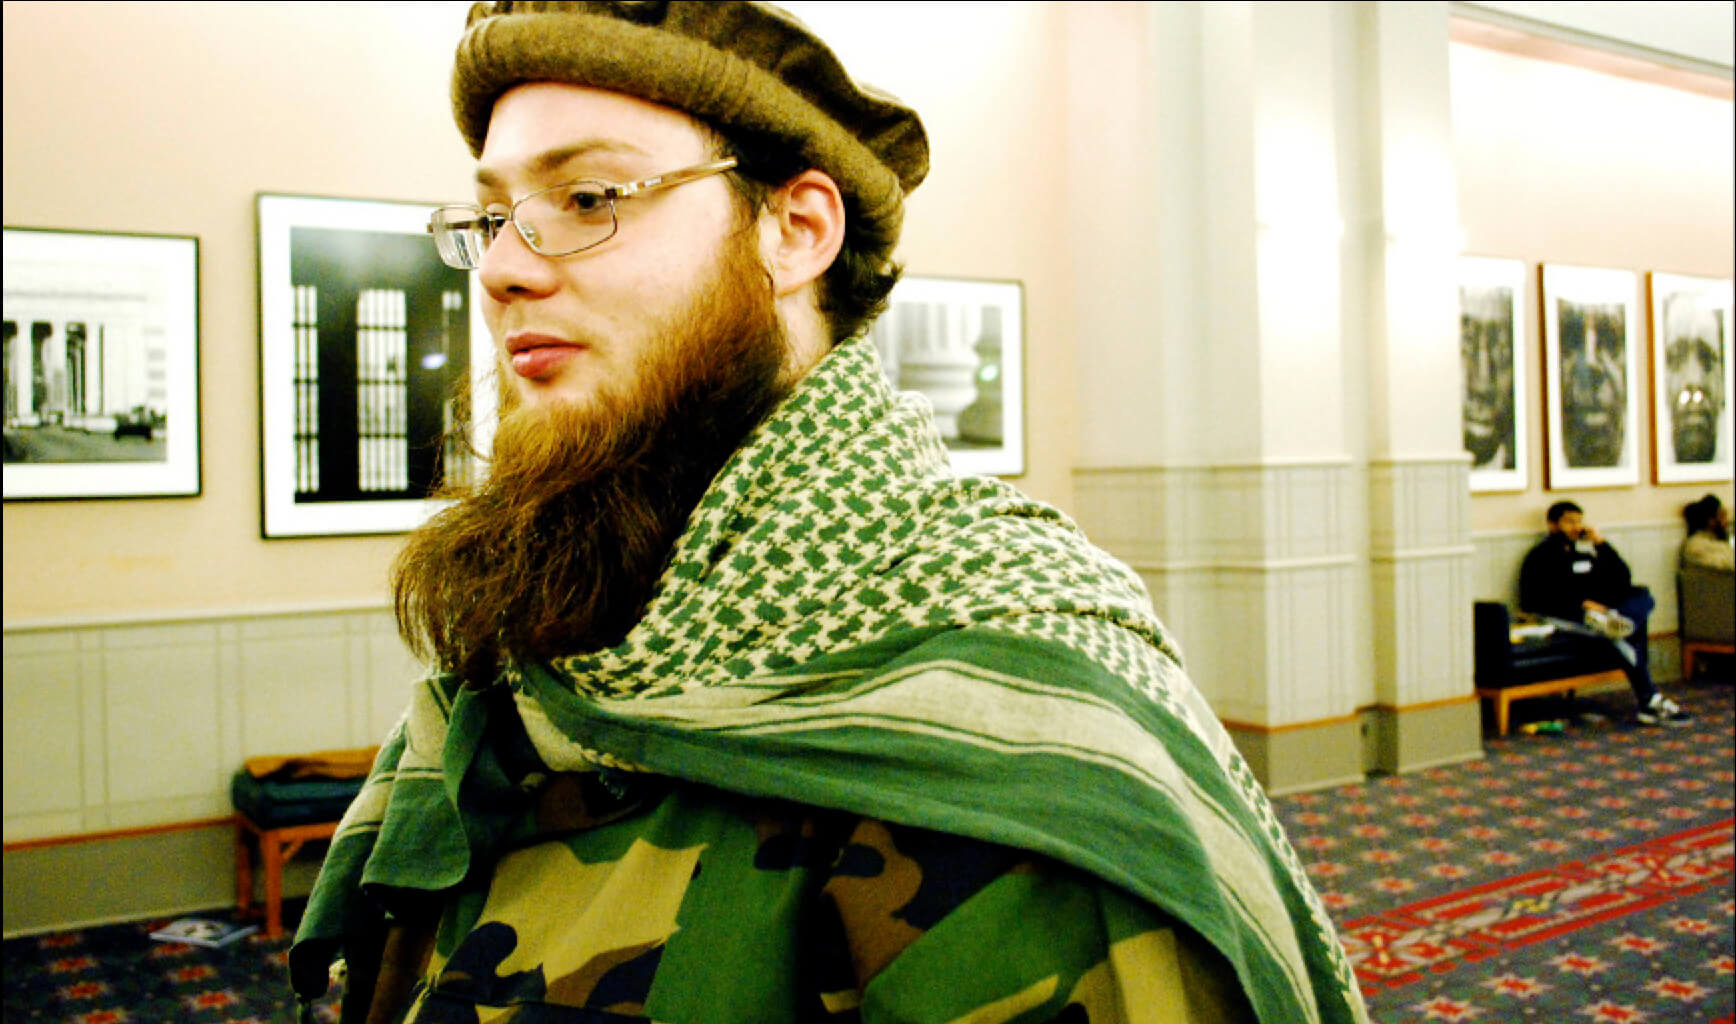 Still from (T)ERROR. A man with a beard faces to the right. He has a large beard and is wearing all green.